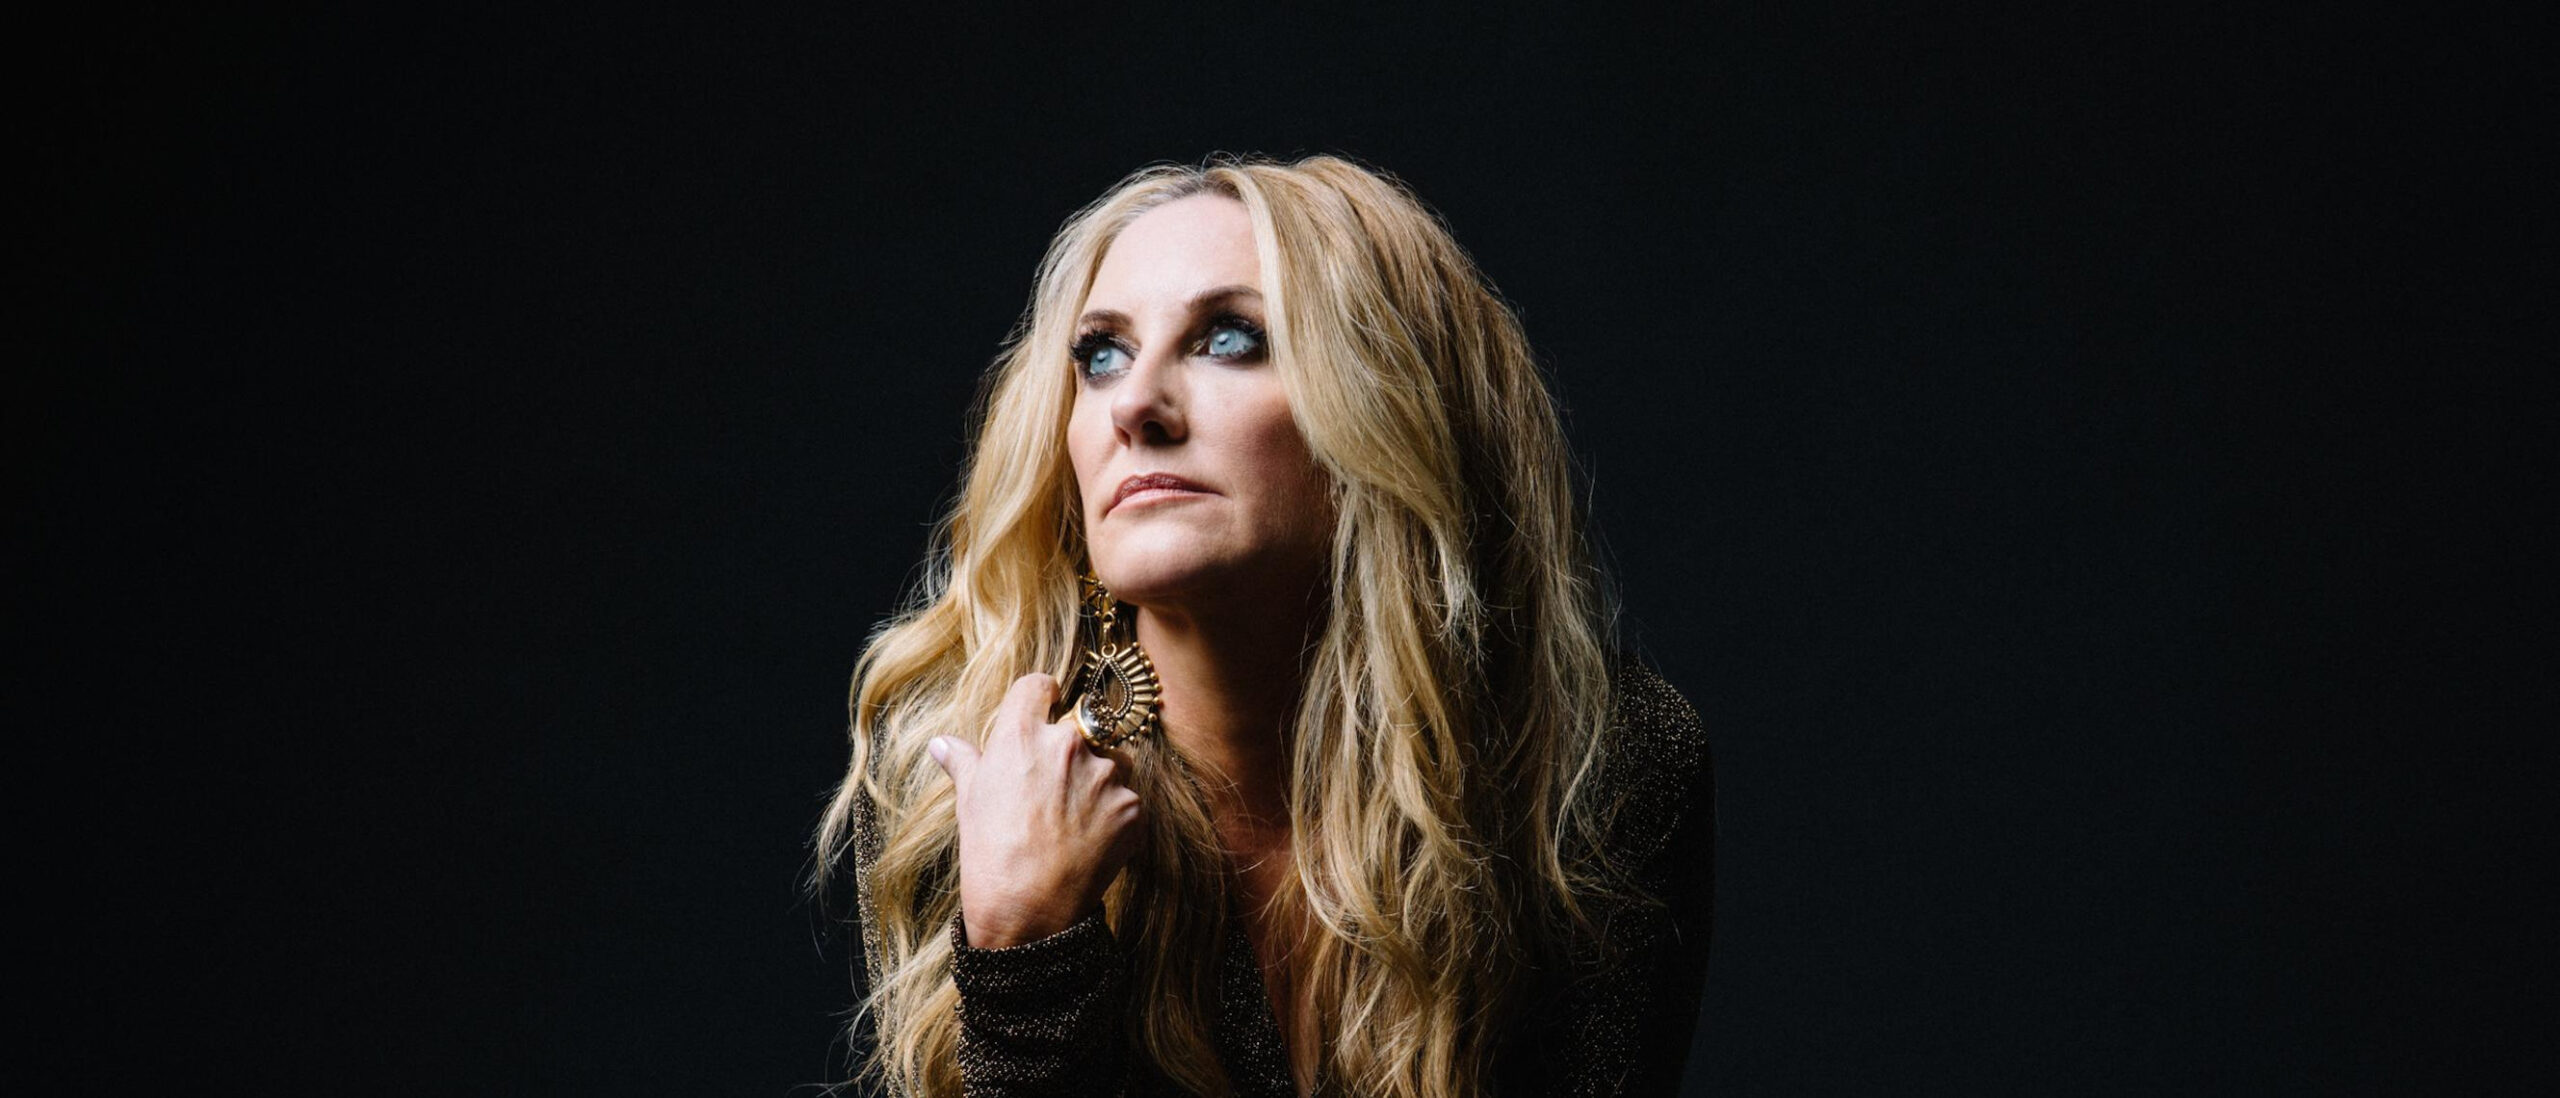 Lee Ann Womack’s I Hope You Dance: A Song That Transcended Genre